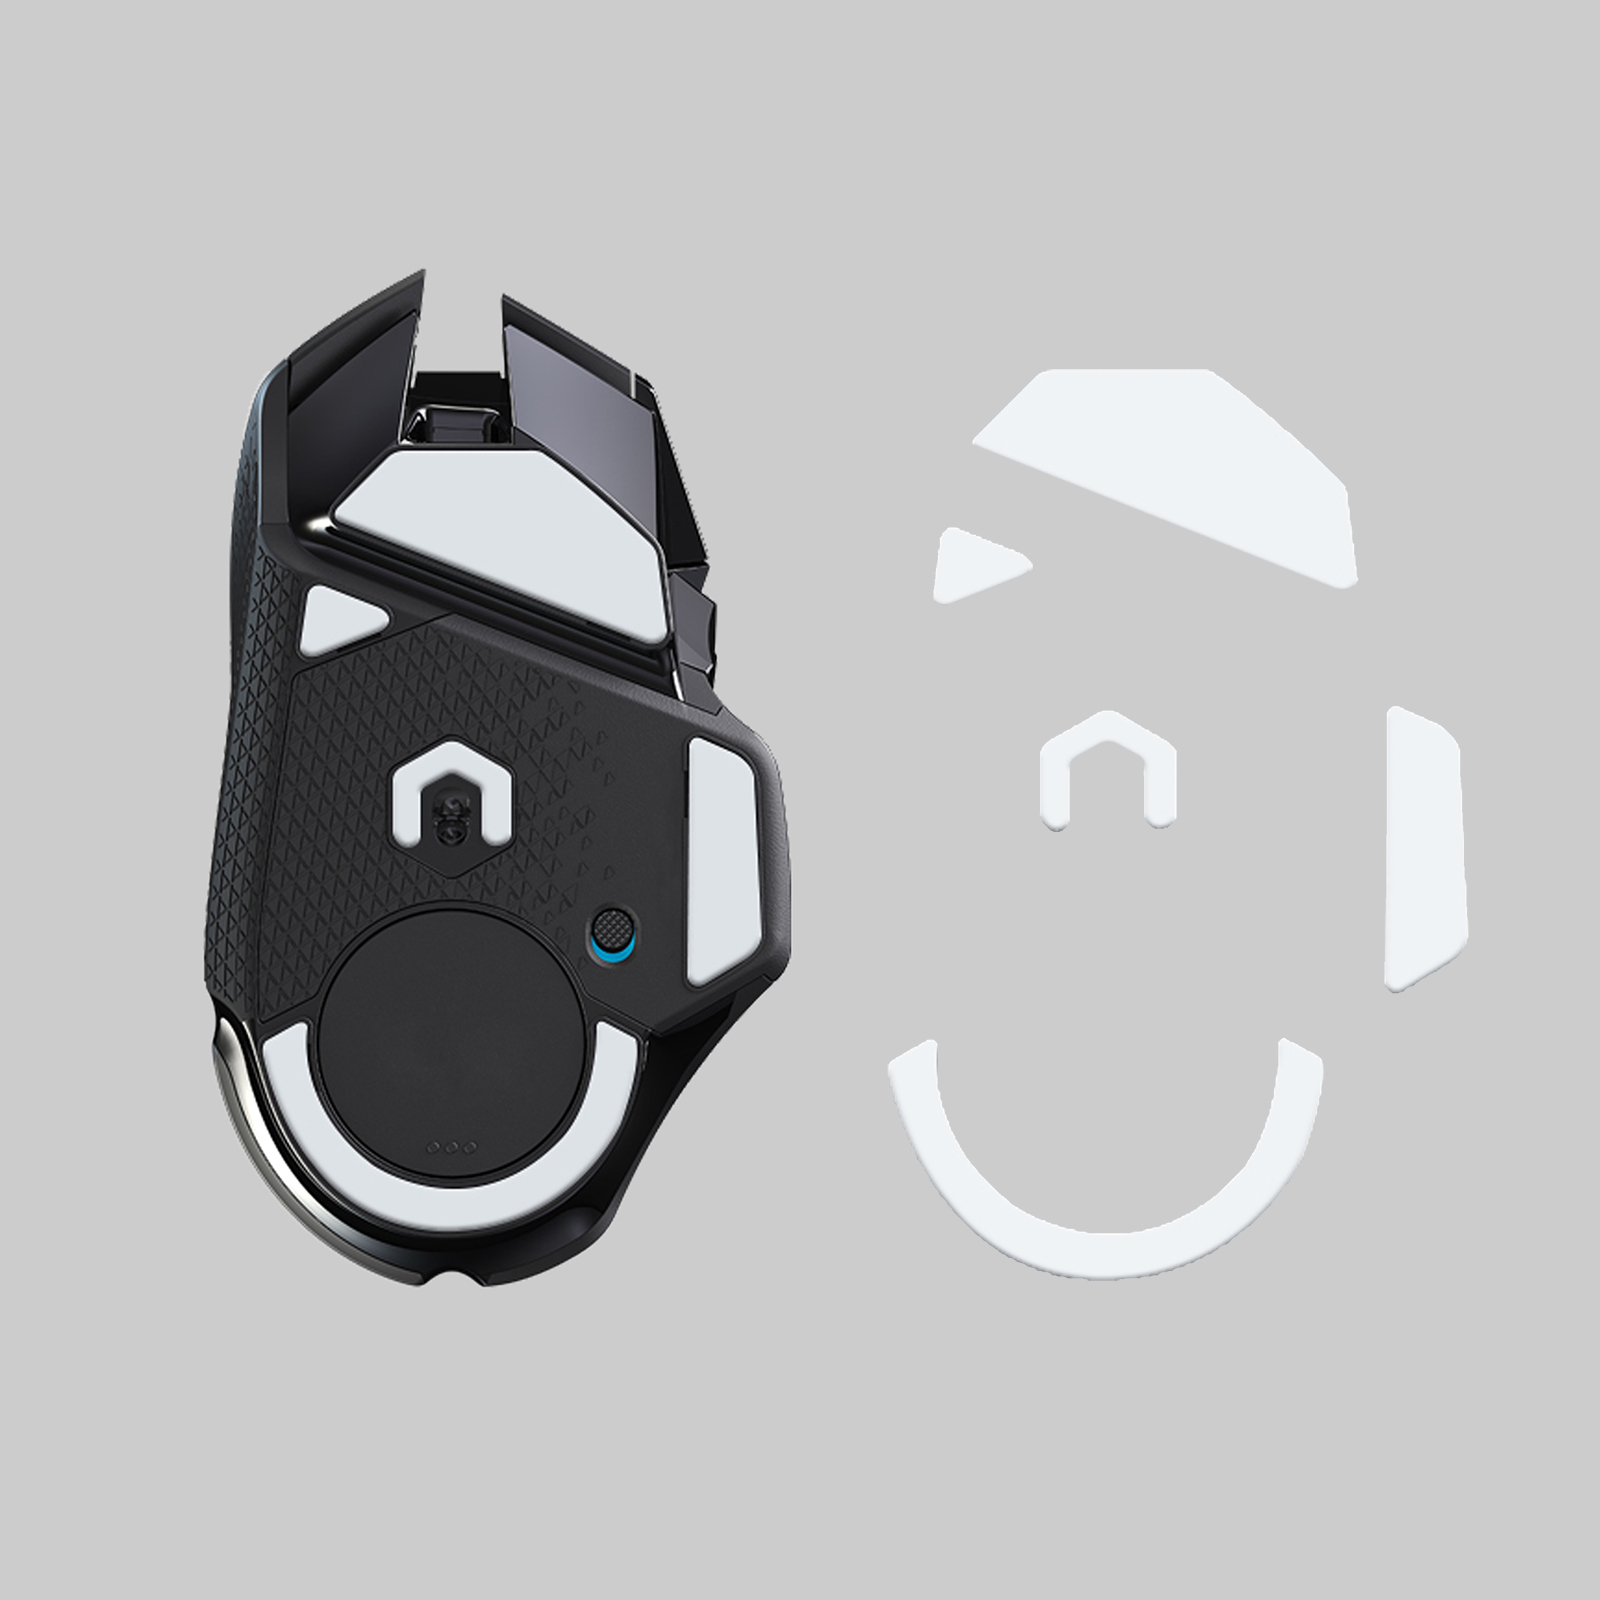 2 Sets Mouse Feet Skates ICE Curved Edges Replacement Superlight Pads Smooth for Logitech G502 Light